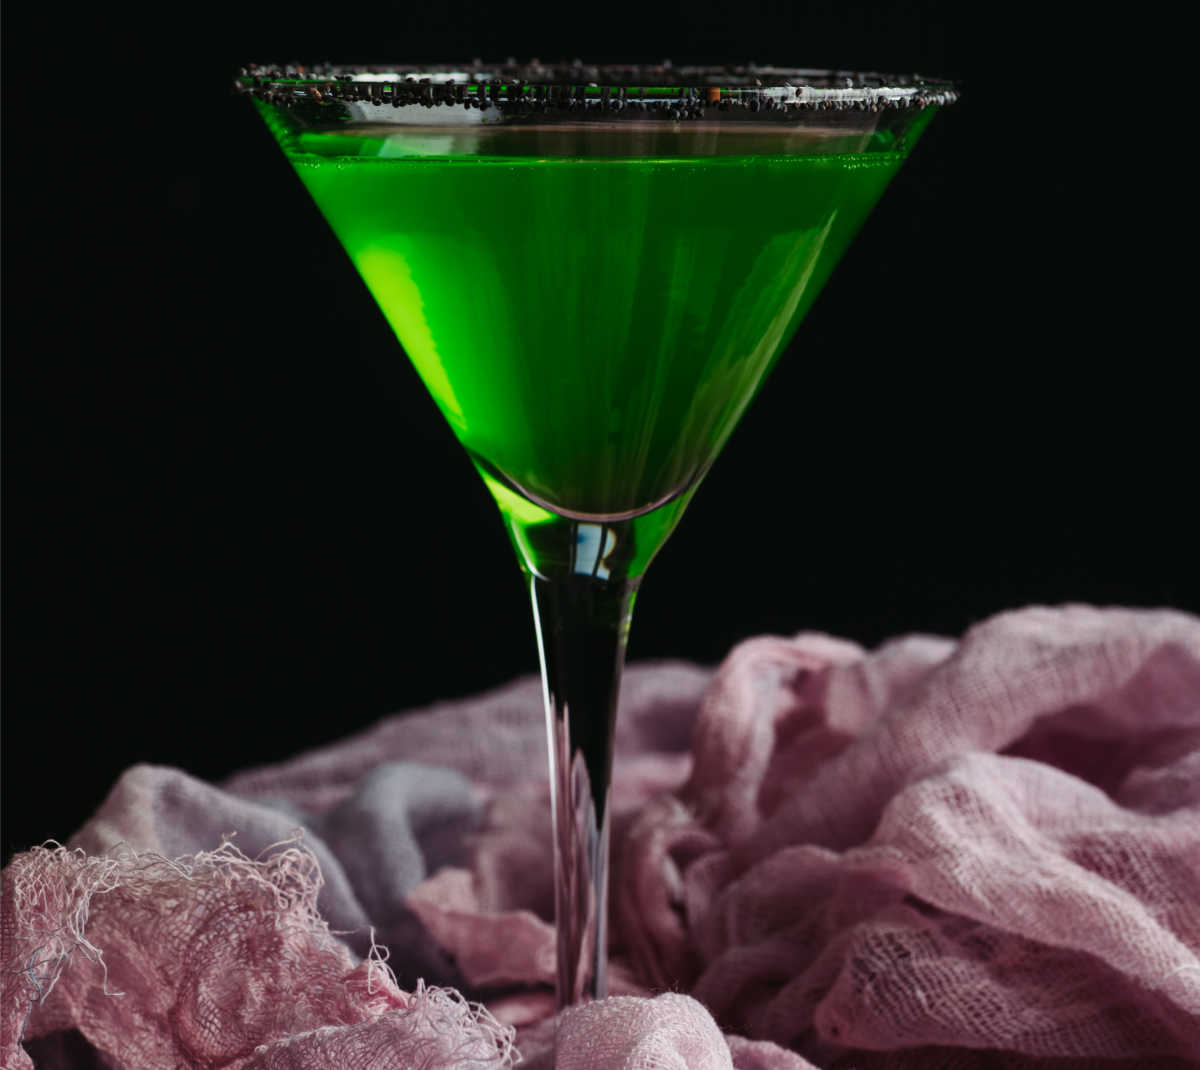 Halloween cocktail recipe: Green Halloween drink in a martini glass with a black rim.